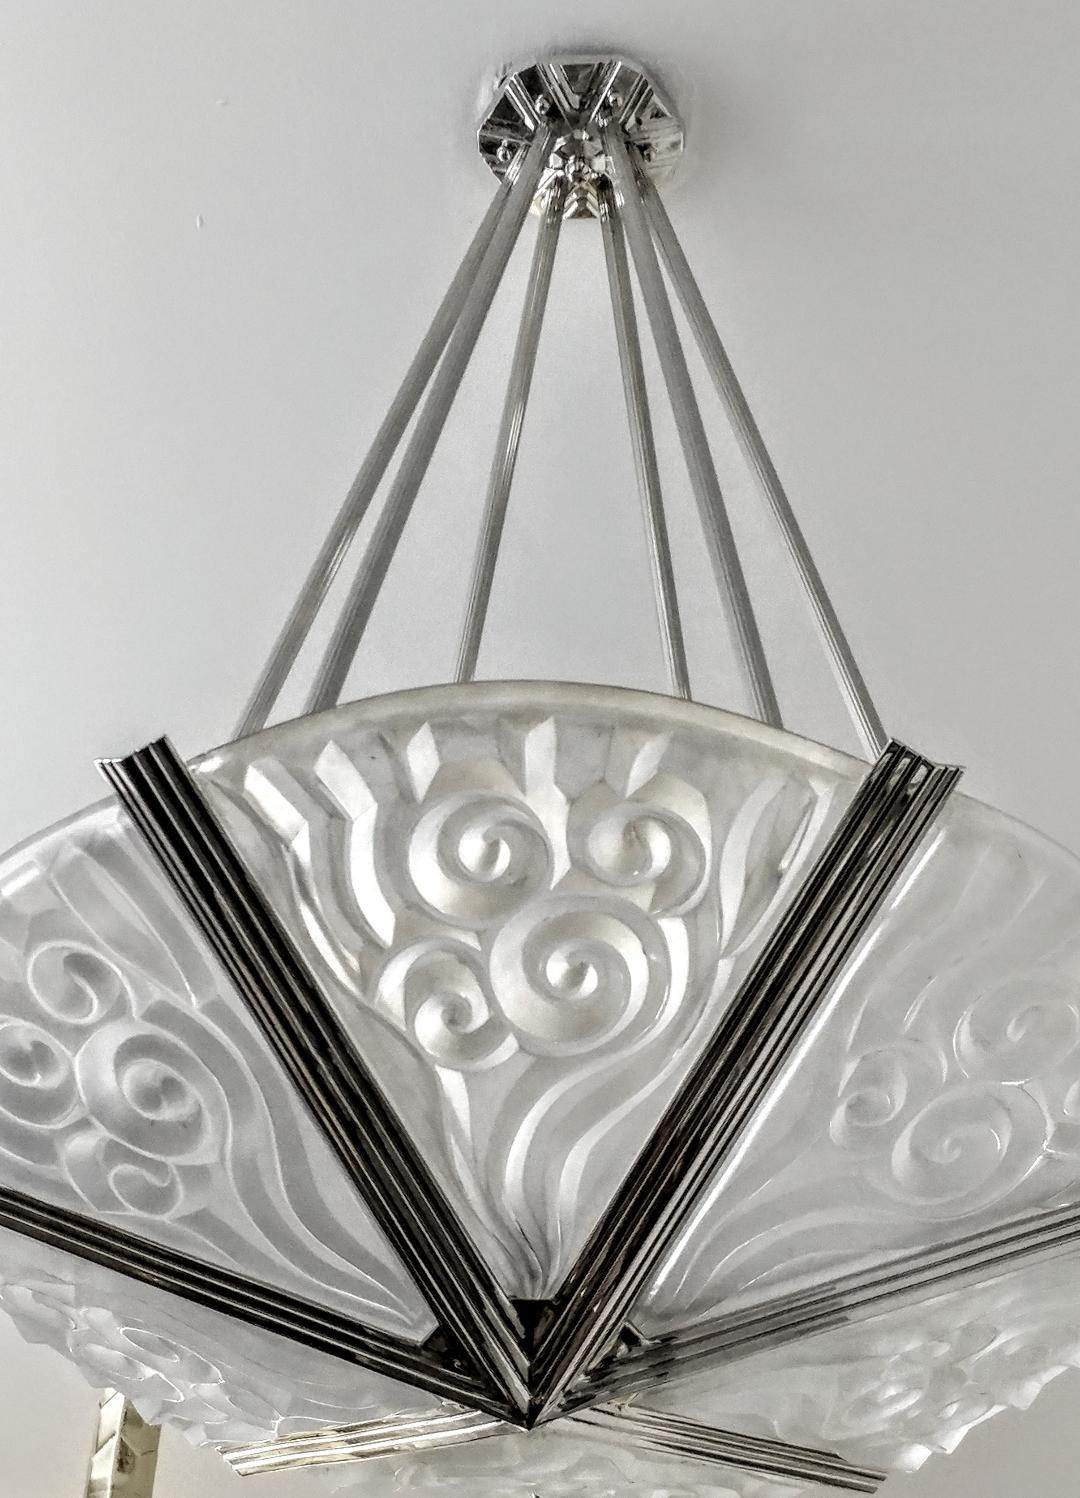 A French Art Deco chandelier by the French Artist 